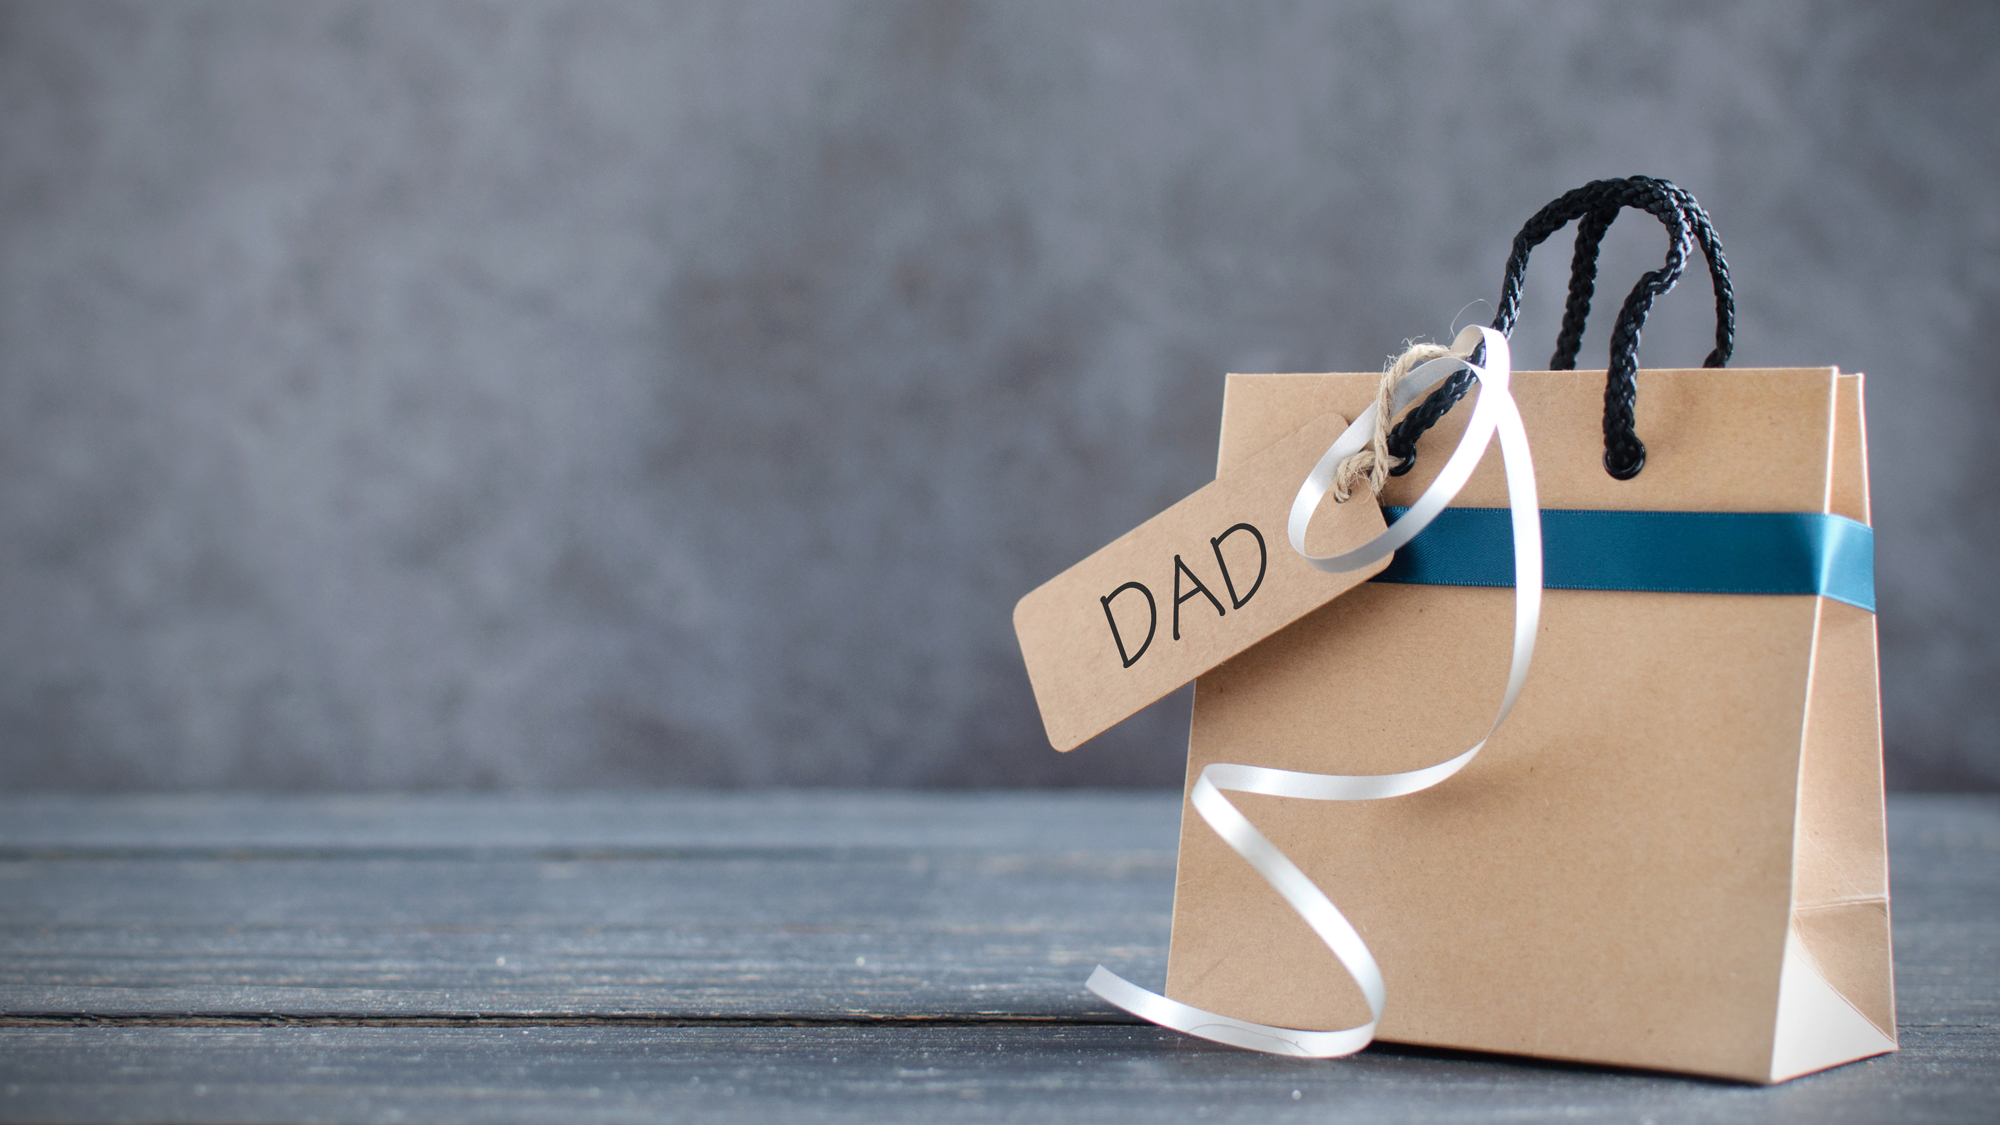 Next Day Delivery: Father's Day Gift Guide